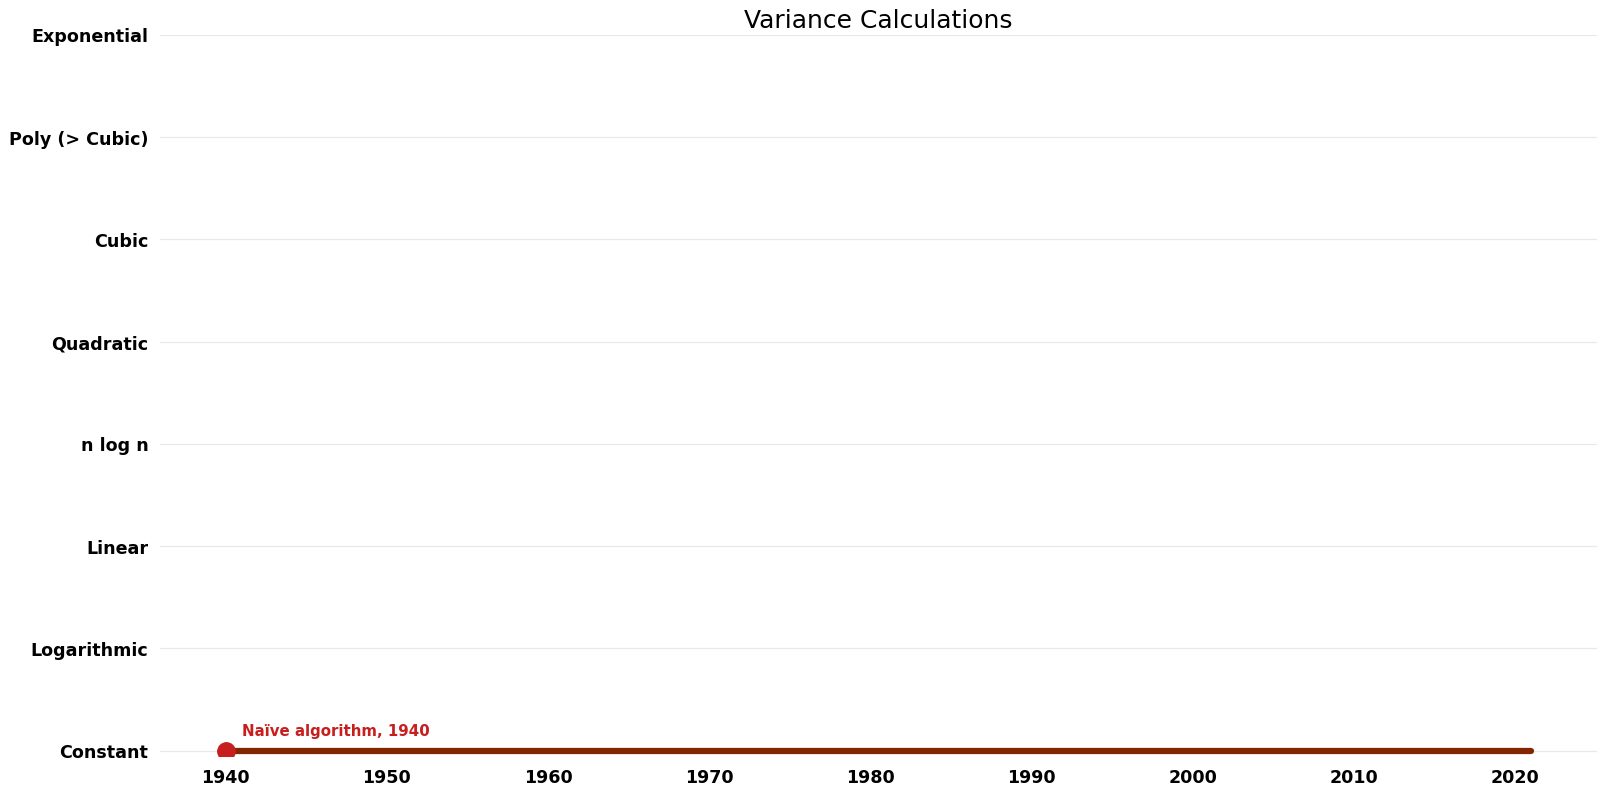 Variance Calculations - Space.png